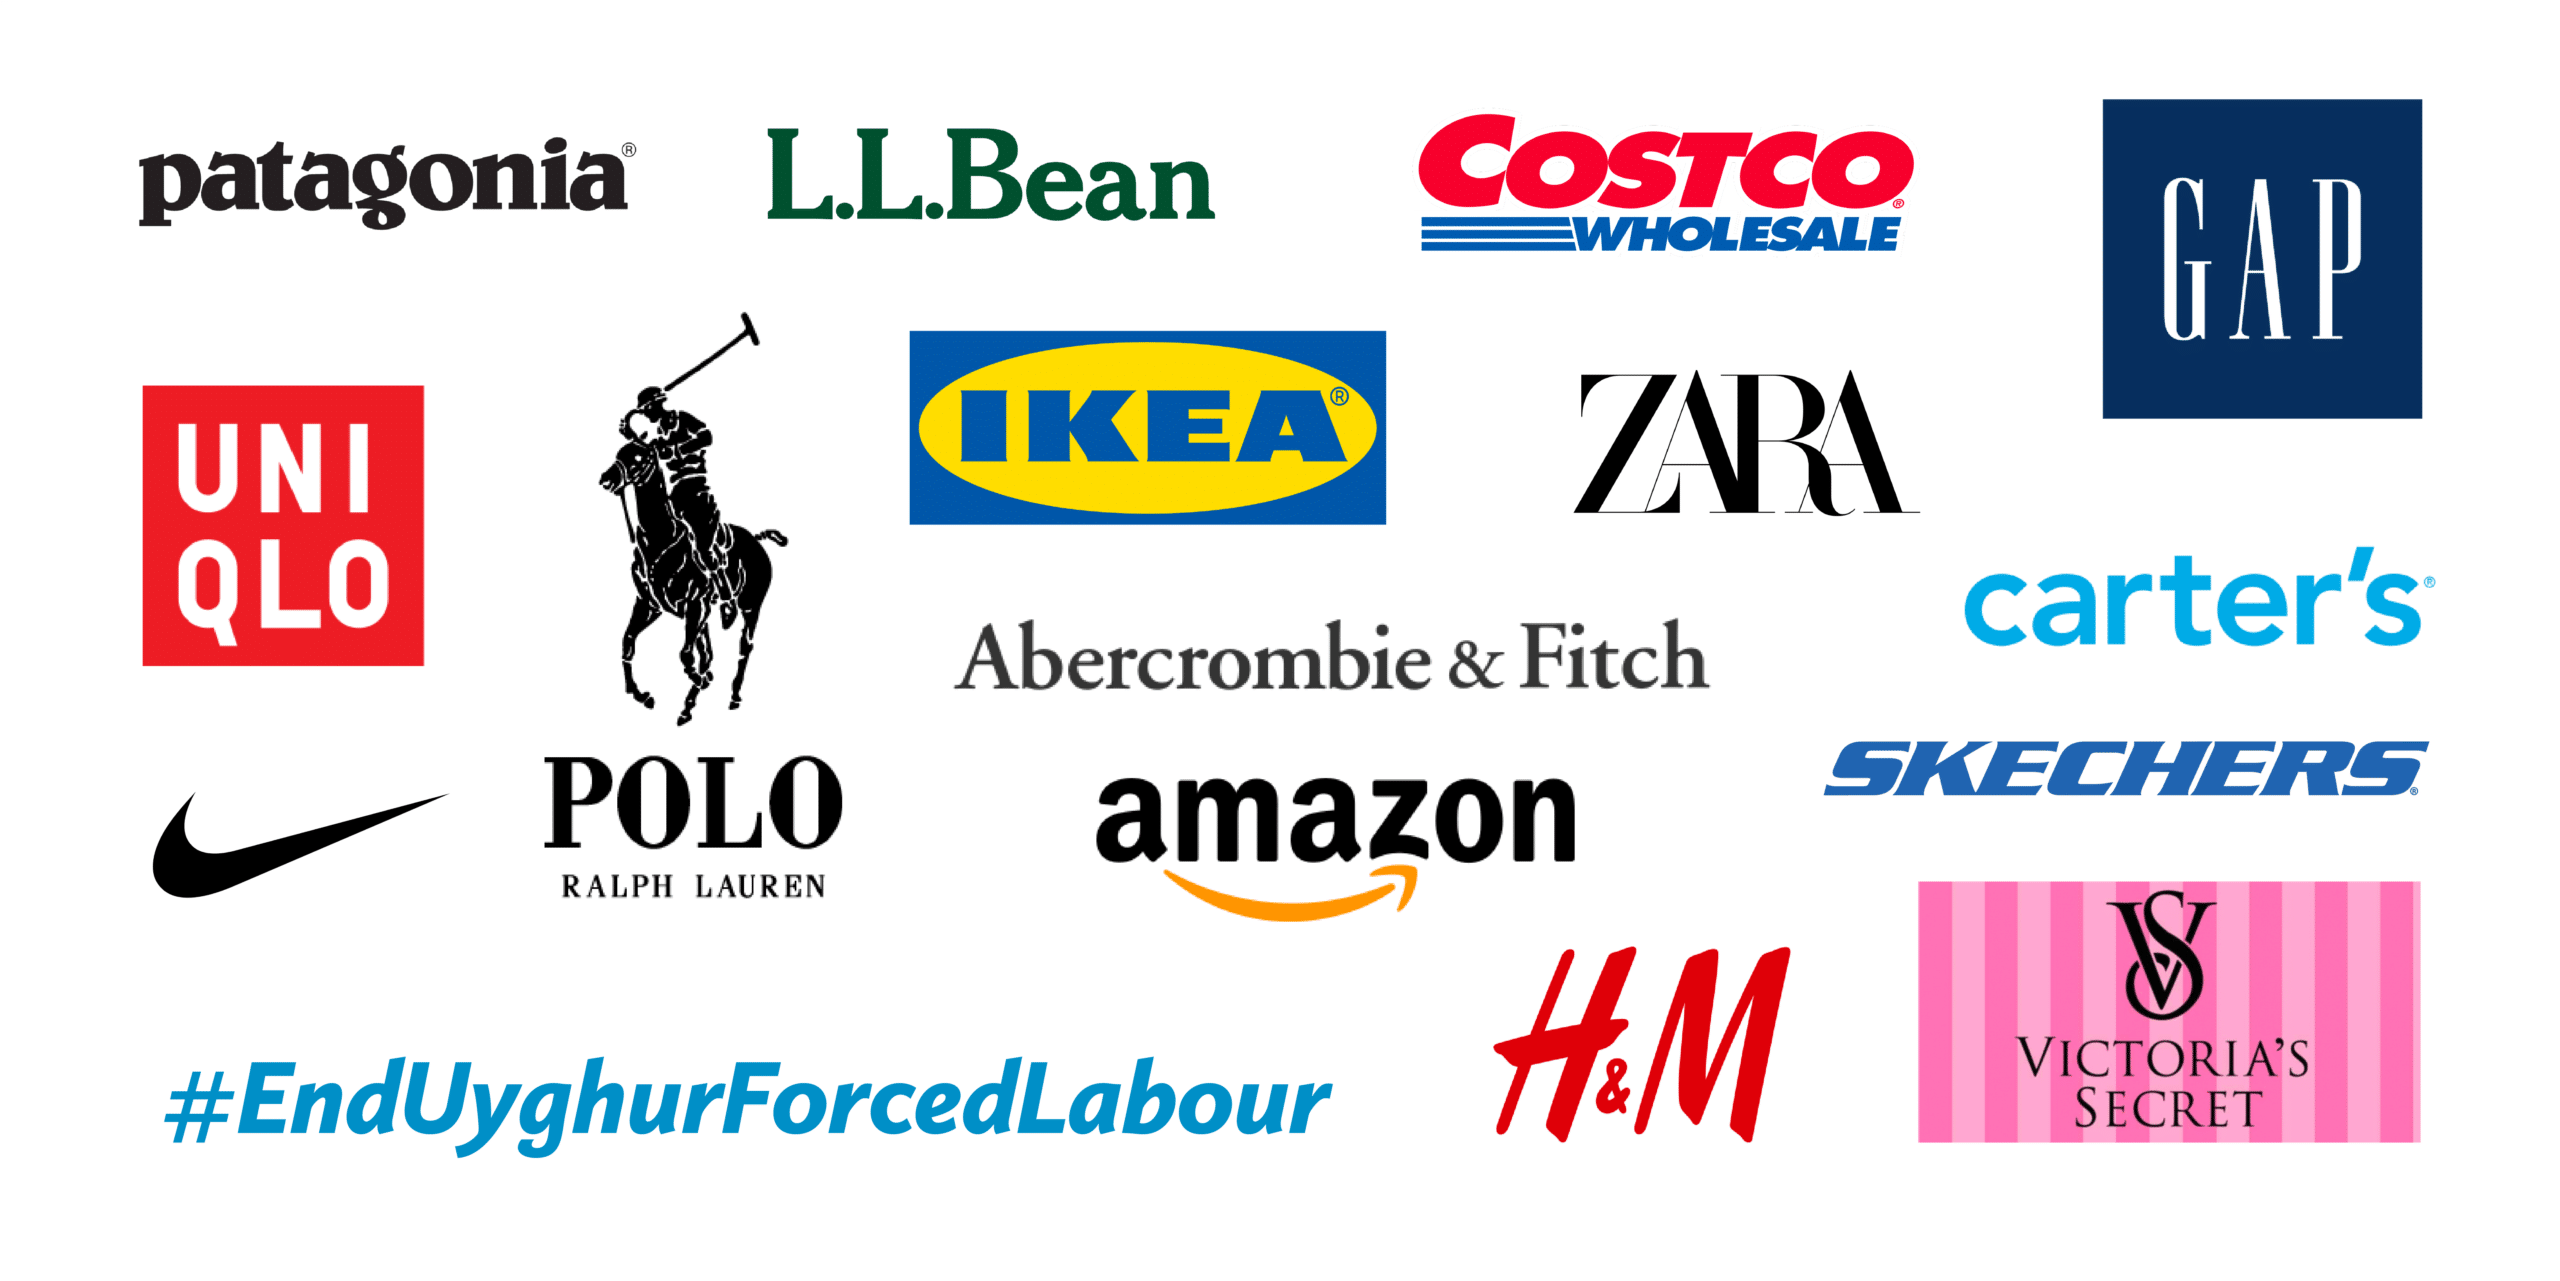 Logos of companies with products connected to forced labor in Xinjiang